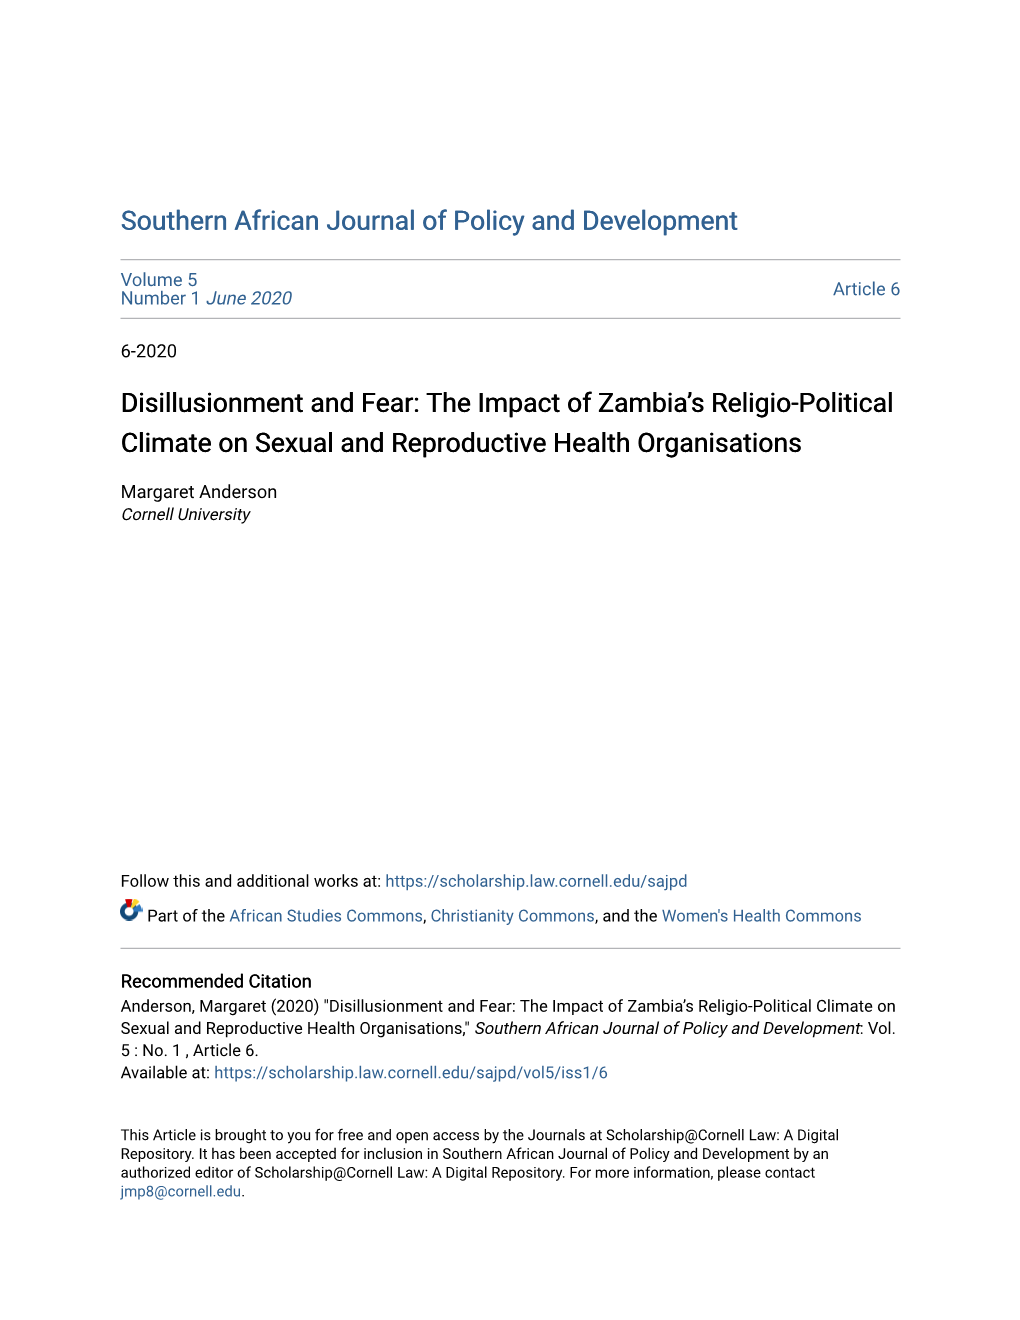 The Impact of Zambia's Religio-Political Climate on Sexual and Reproductive Health Organisations